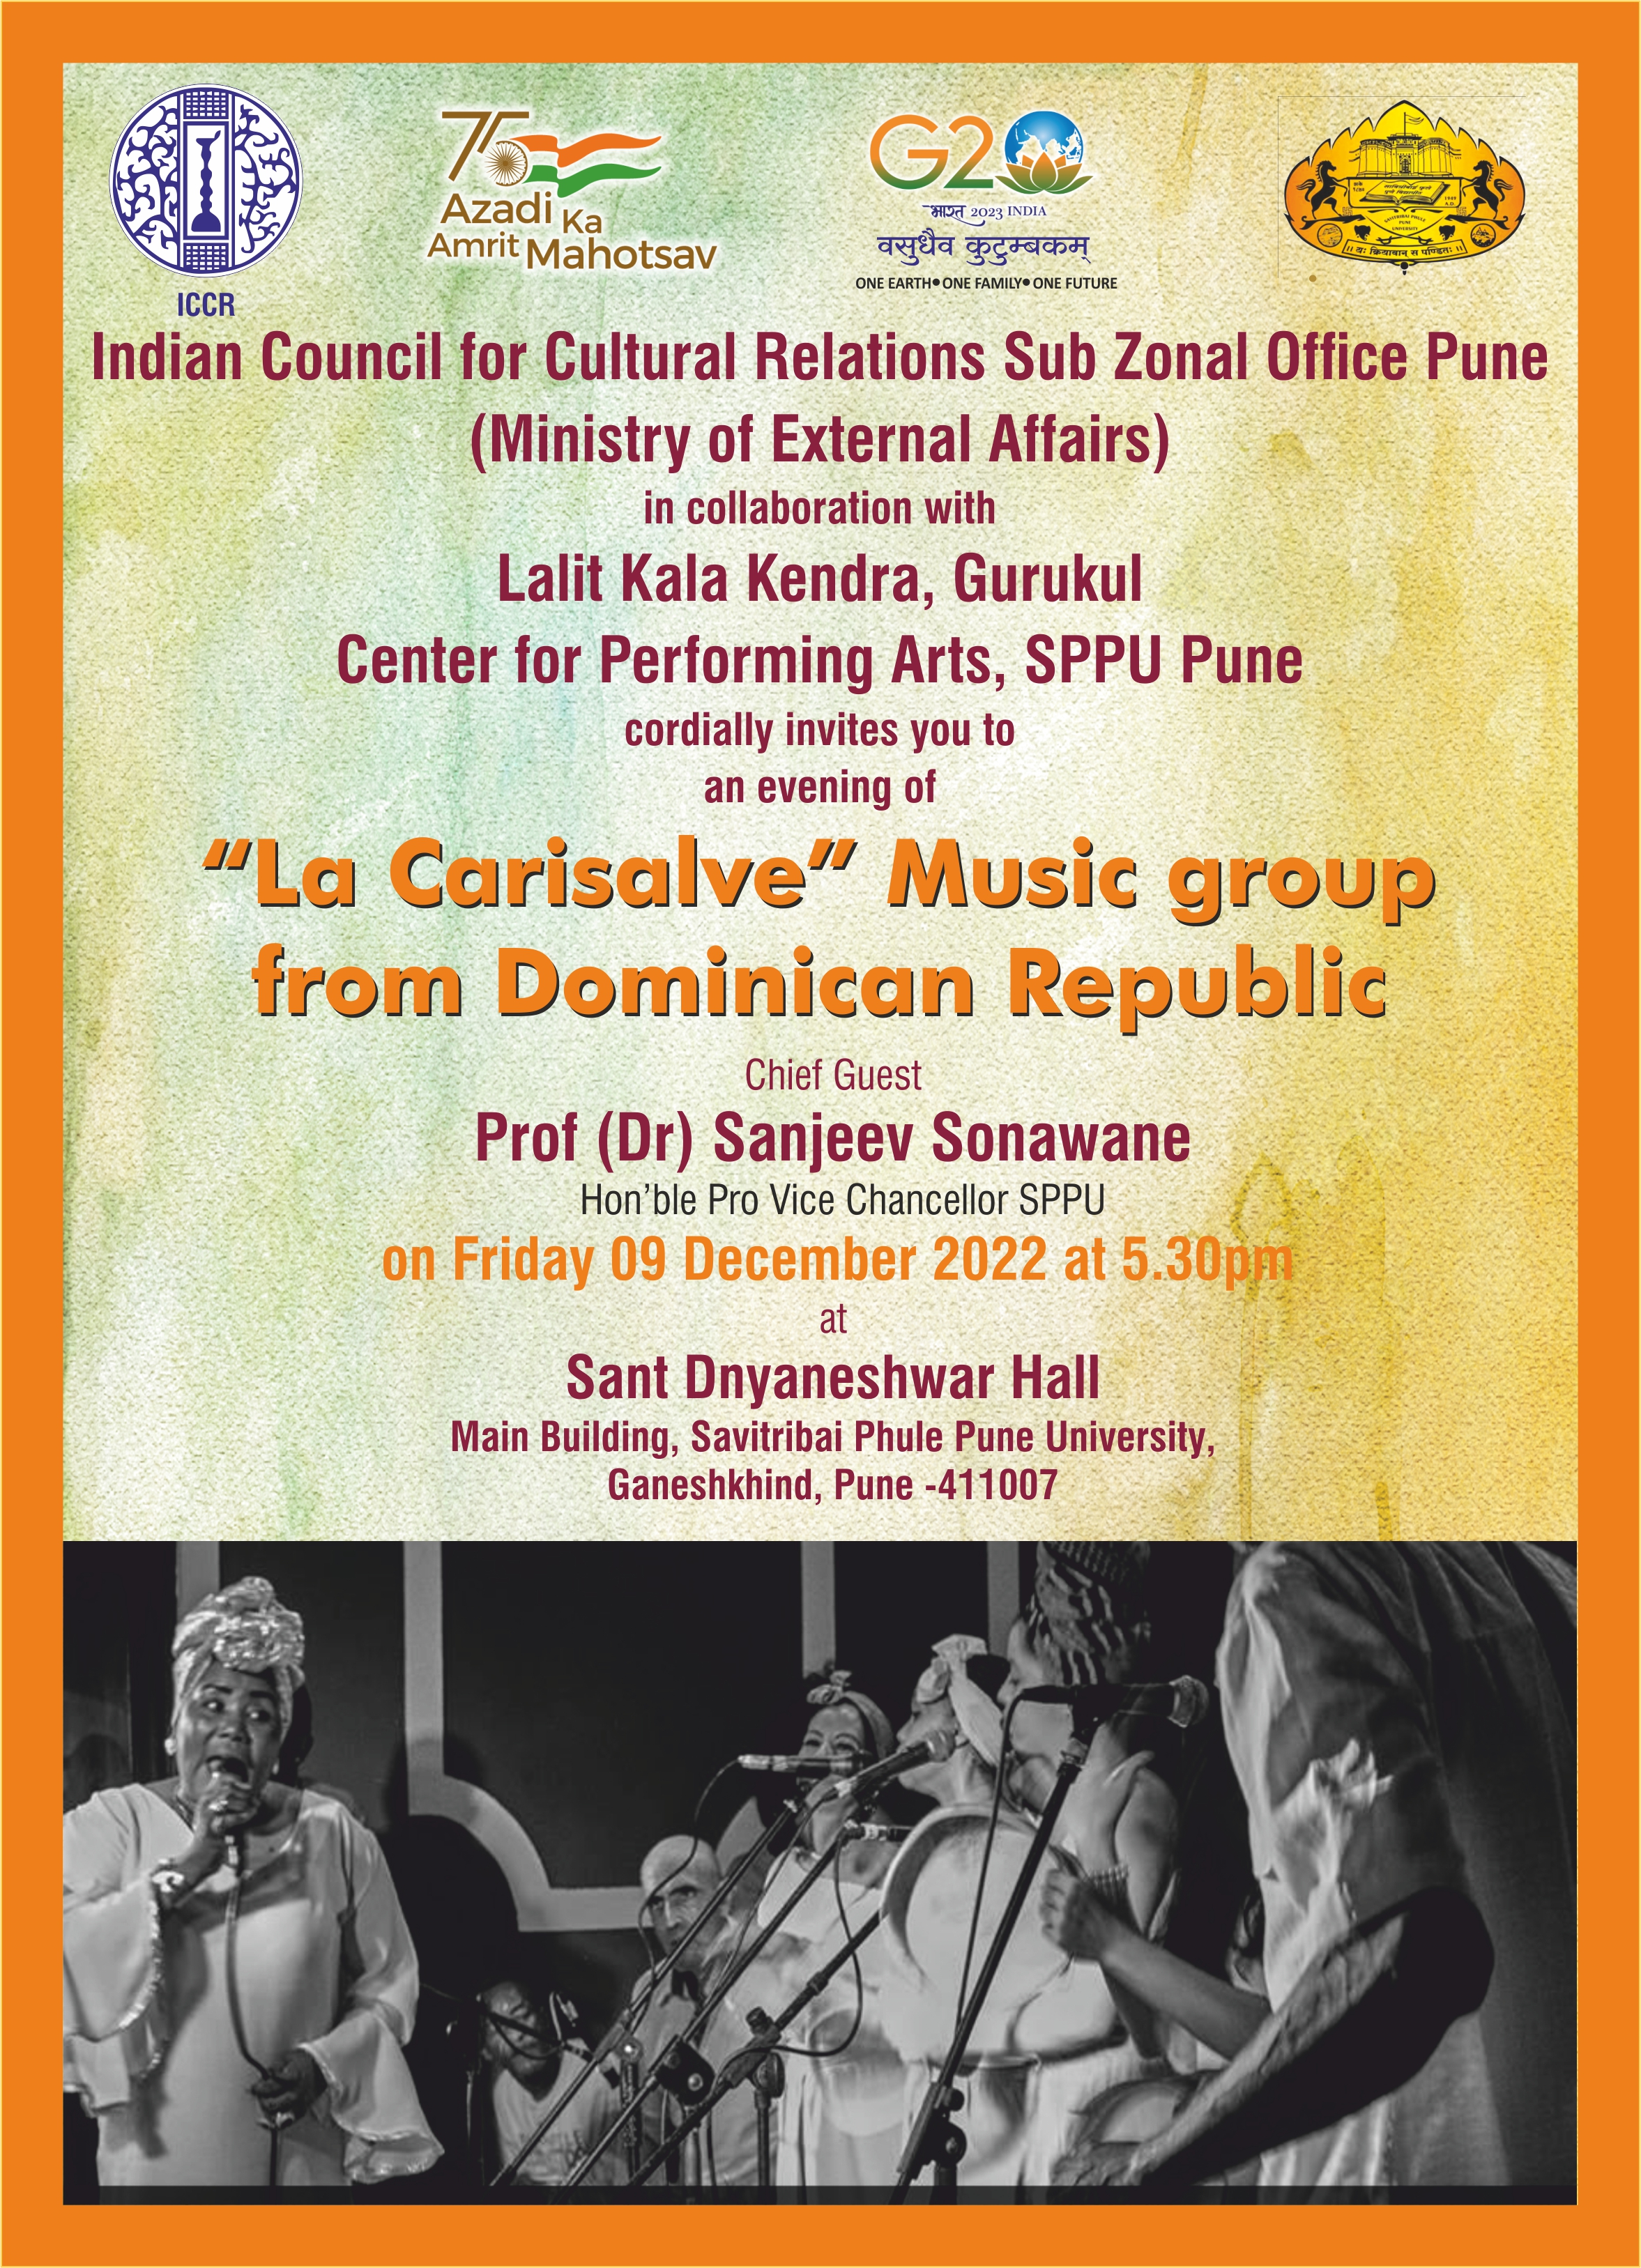 Invitation of "La Carisalve" Music group from Dominican Republic on Friday 09th December 2022 at 5.30pm